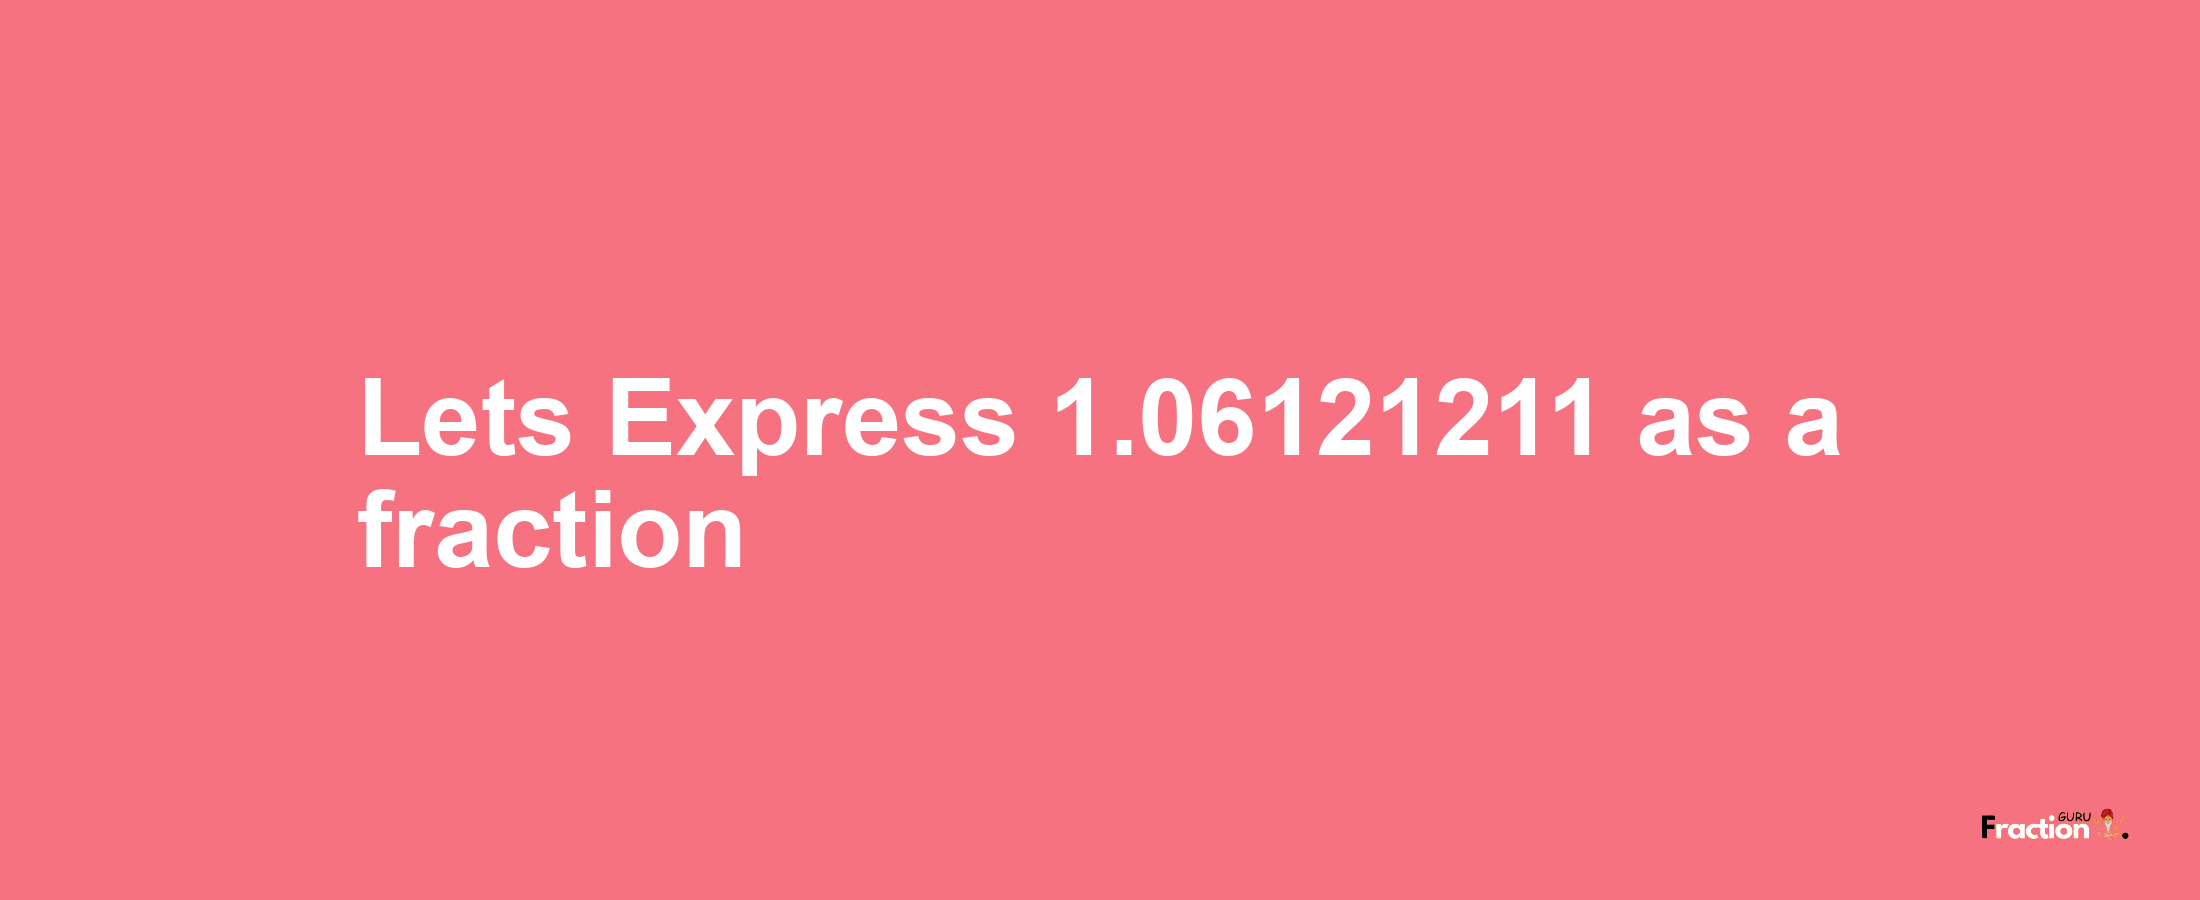 Lets Express 1.06121211 as afraction